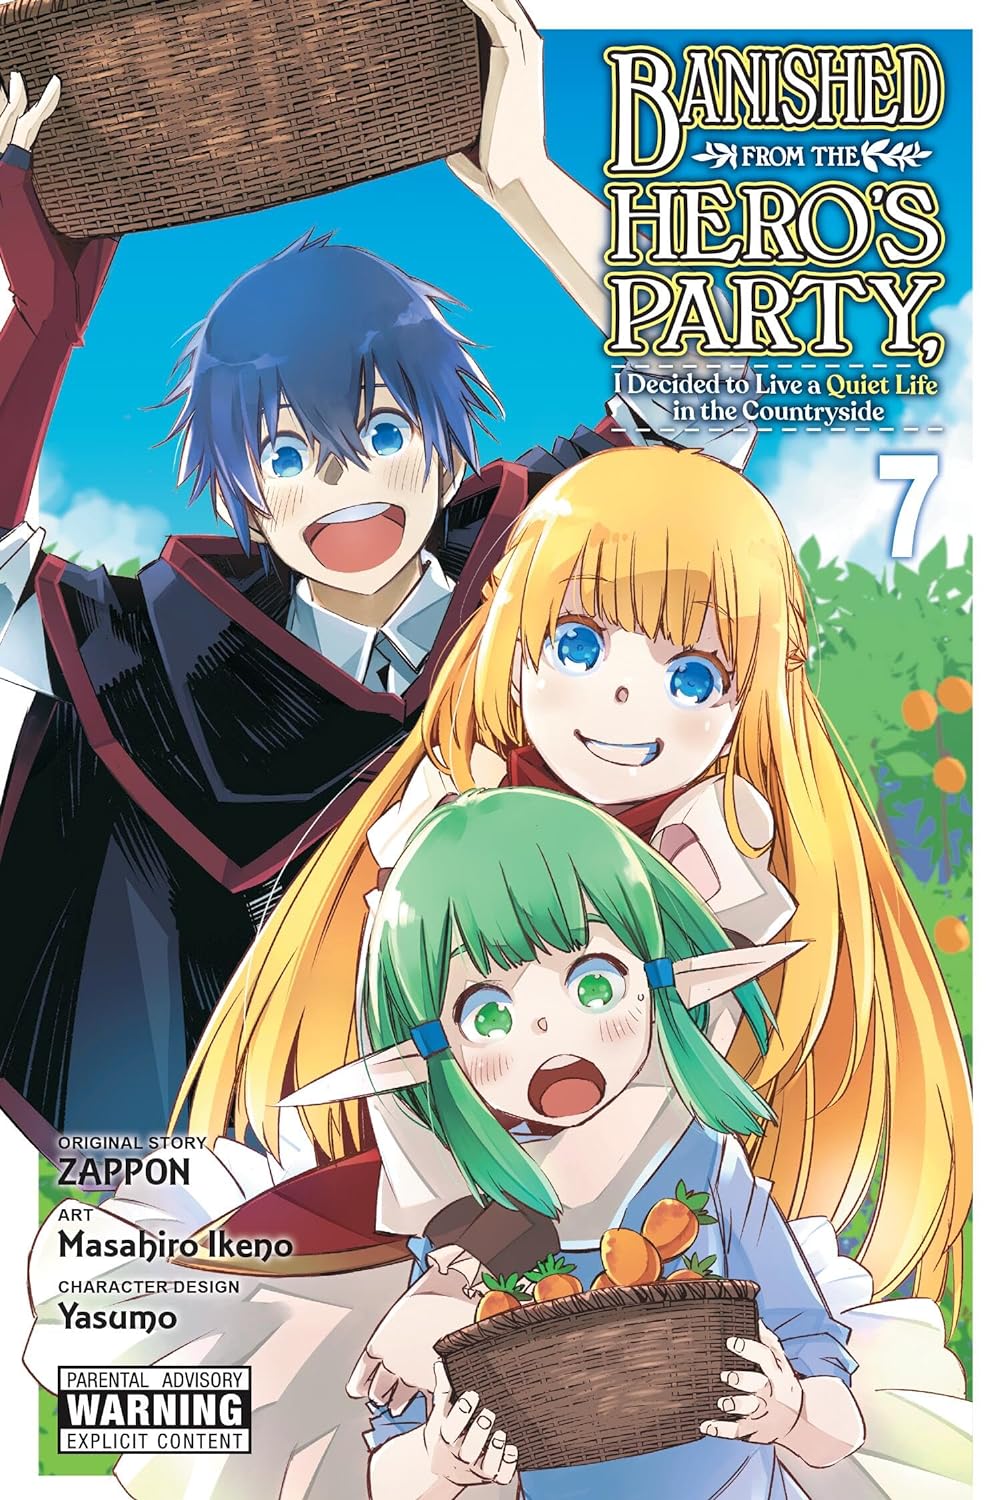 Banished from the Hero's Party, I Decided to Live a Quiet Life in the Countryside (Manga) Vol. 07